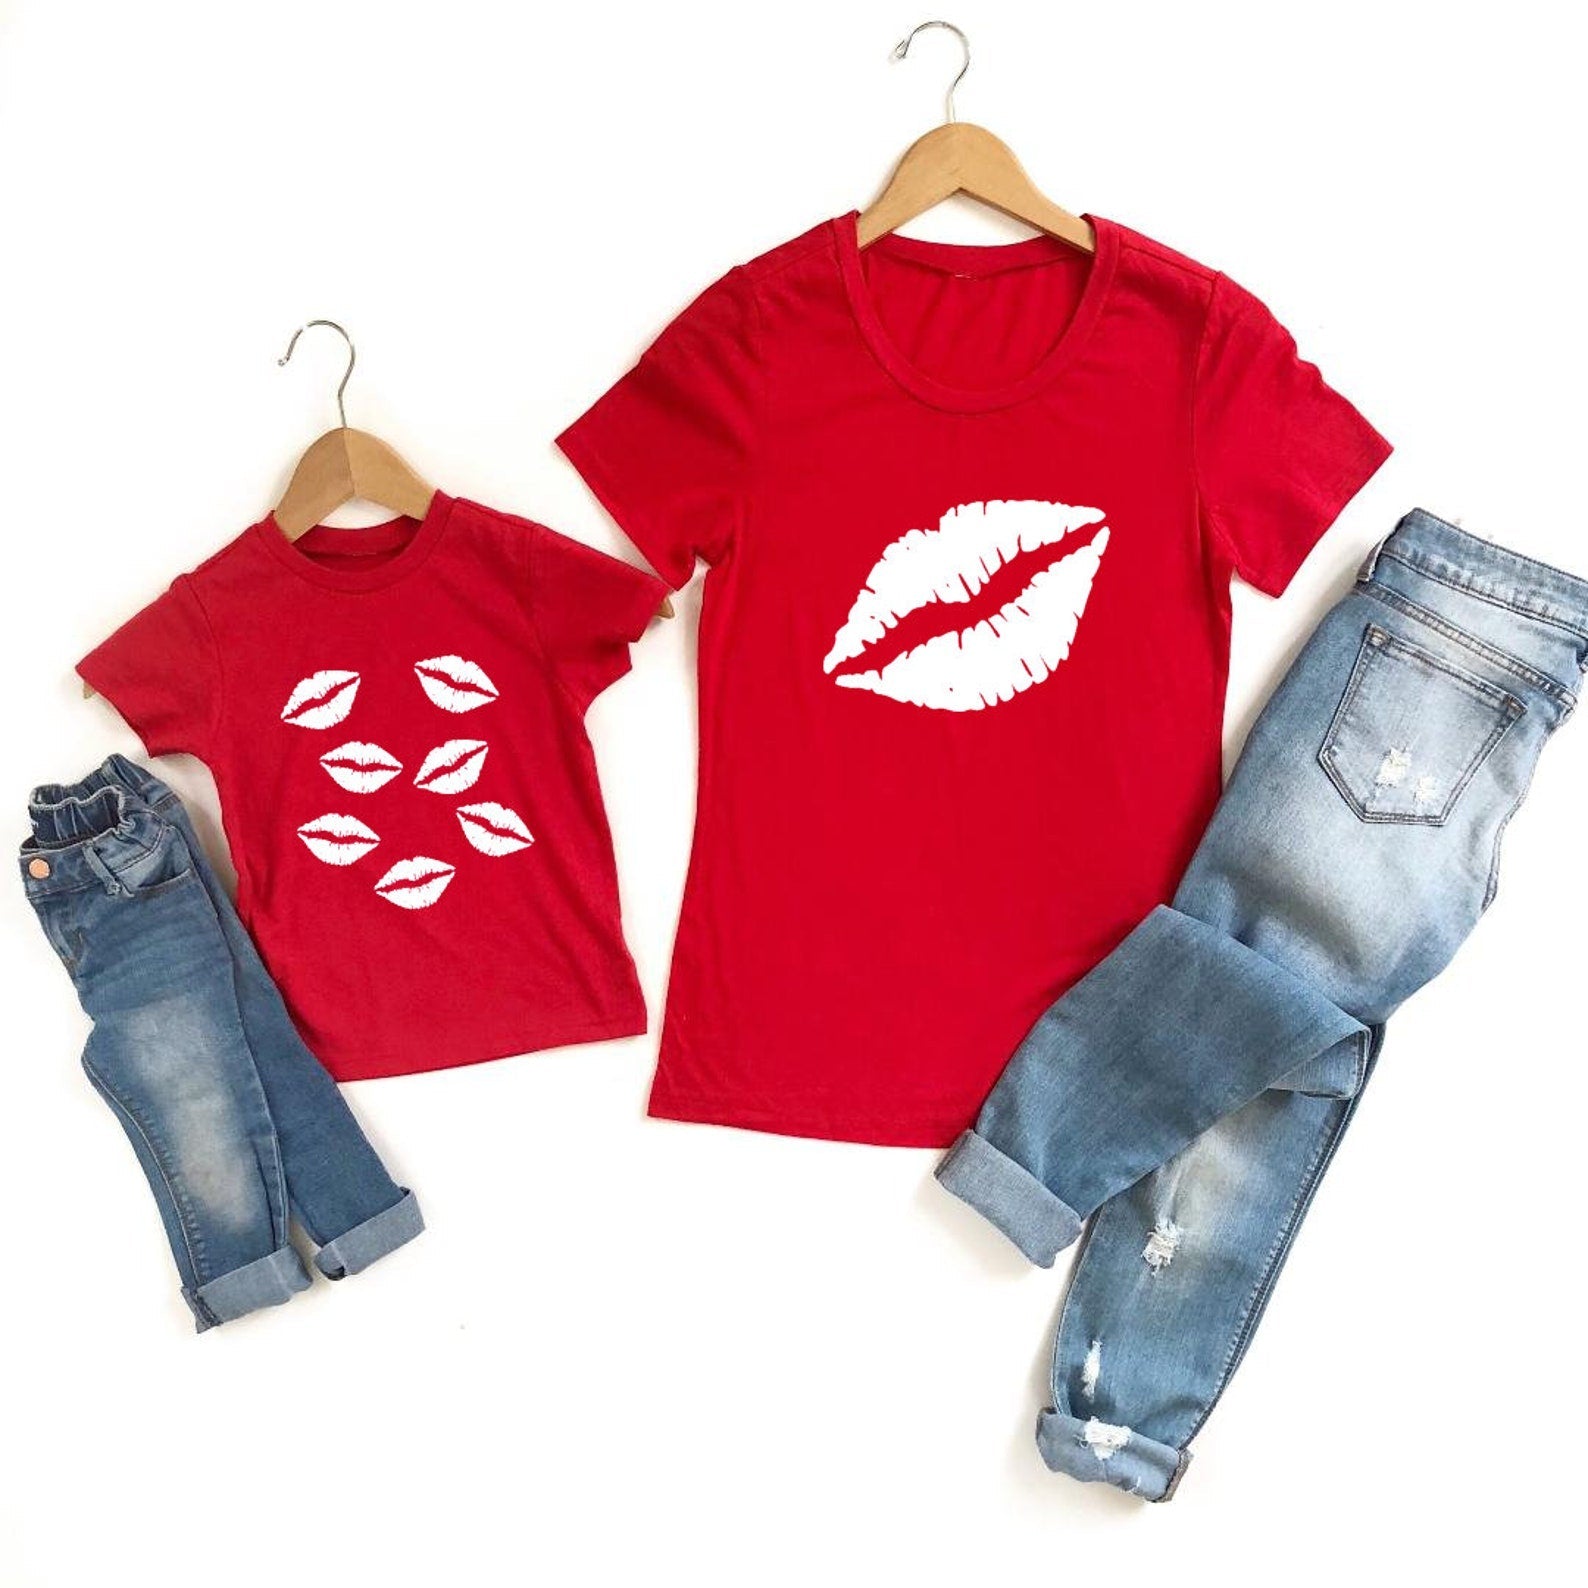 Kisses Red Valentines Day Matching Shirt - LITTLE MIA BELLA